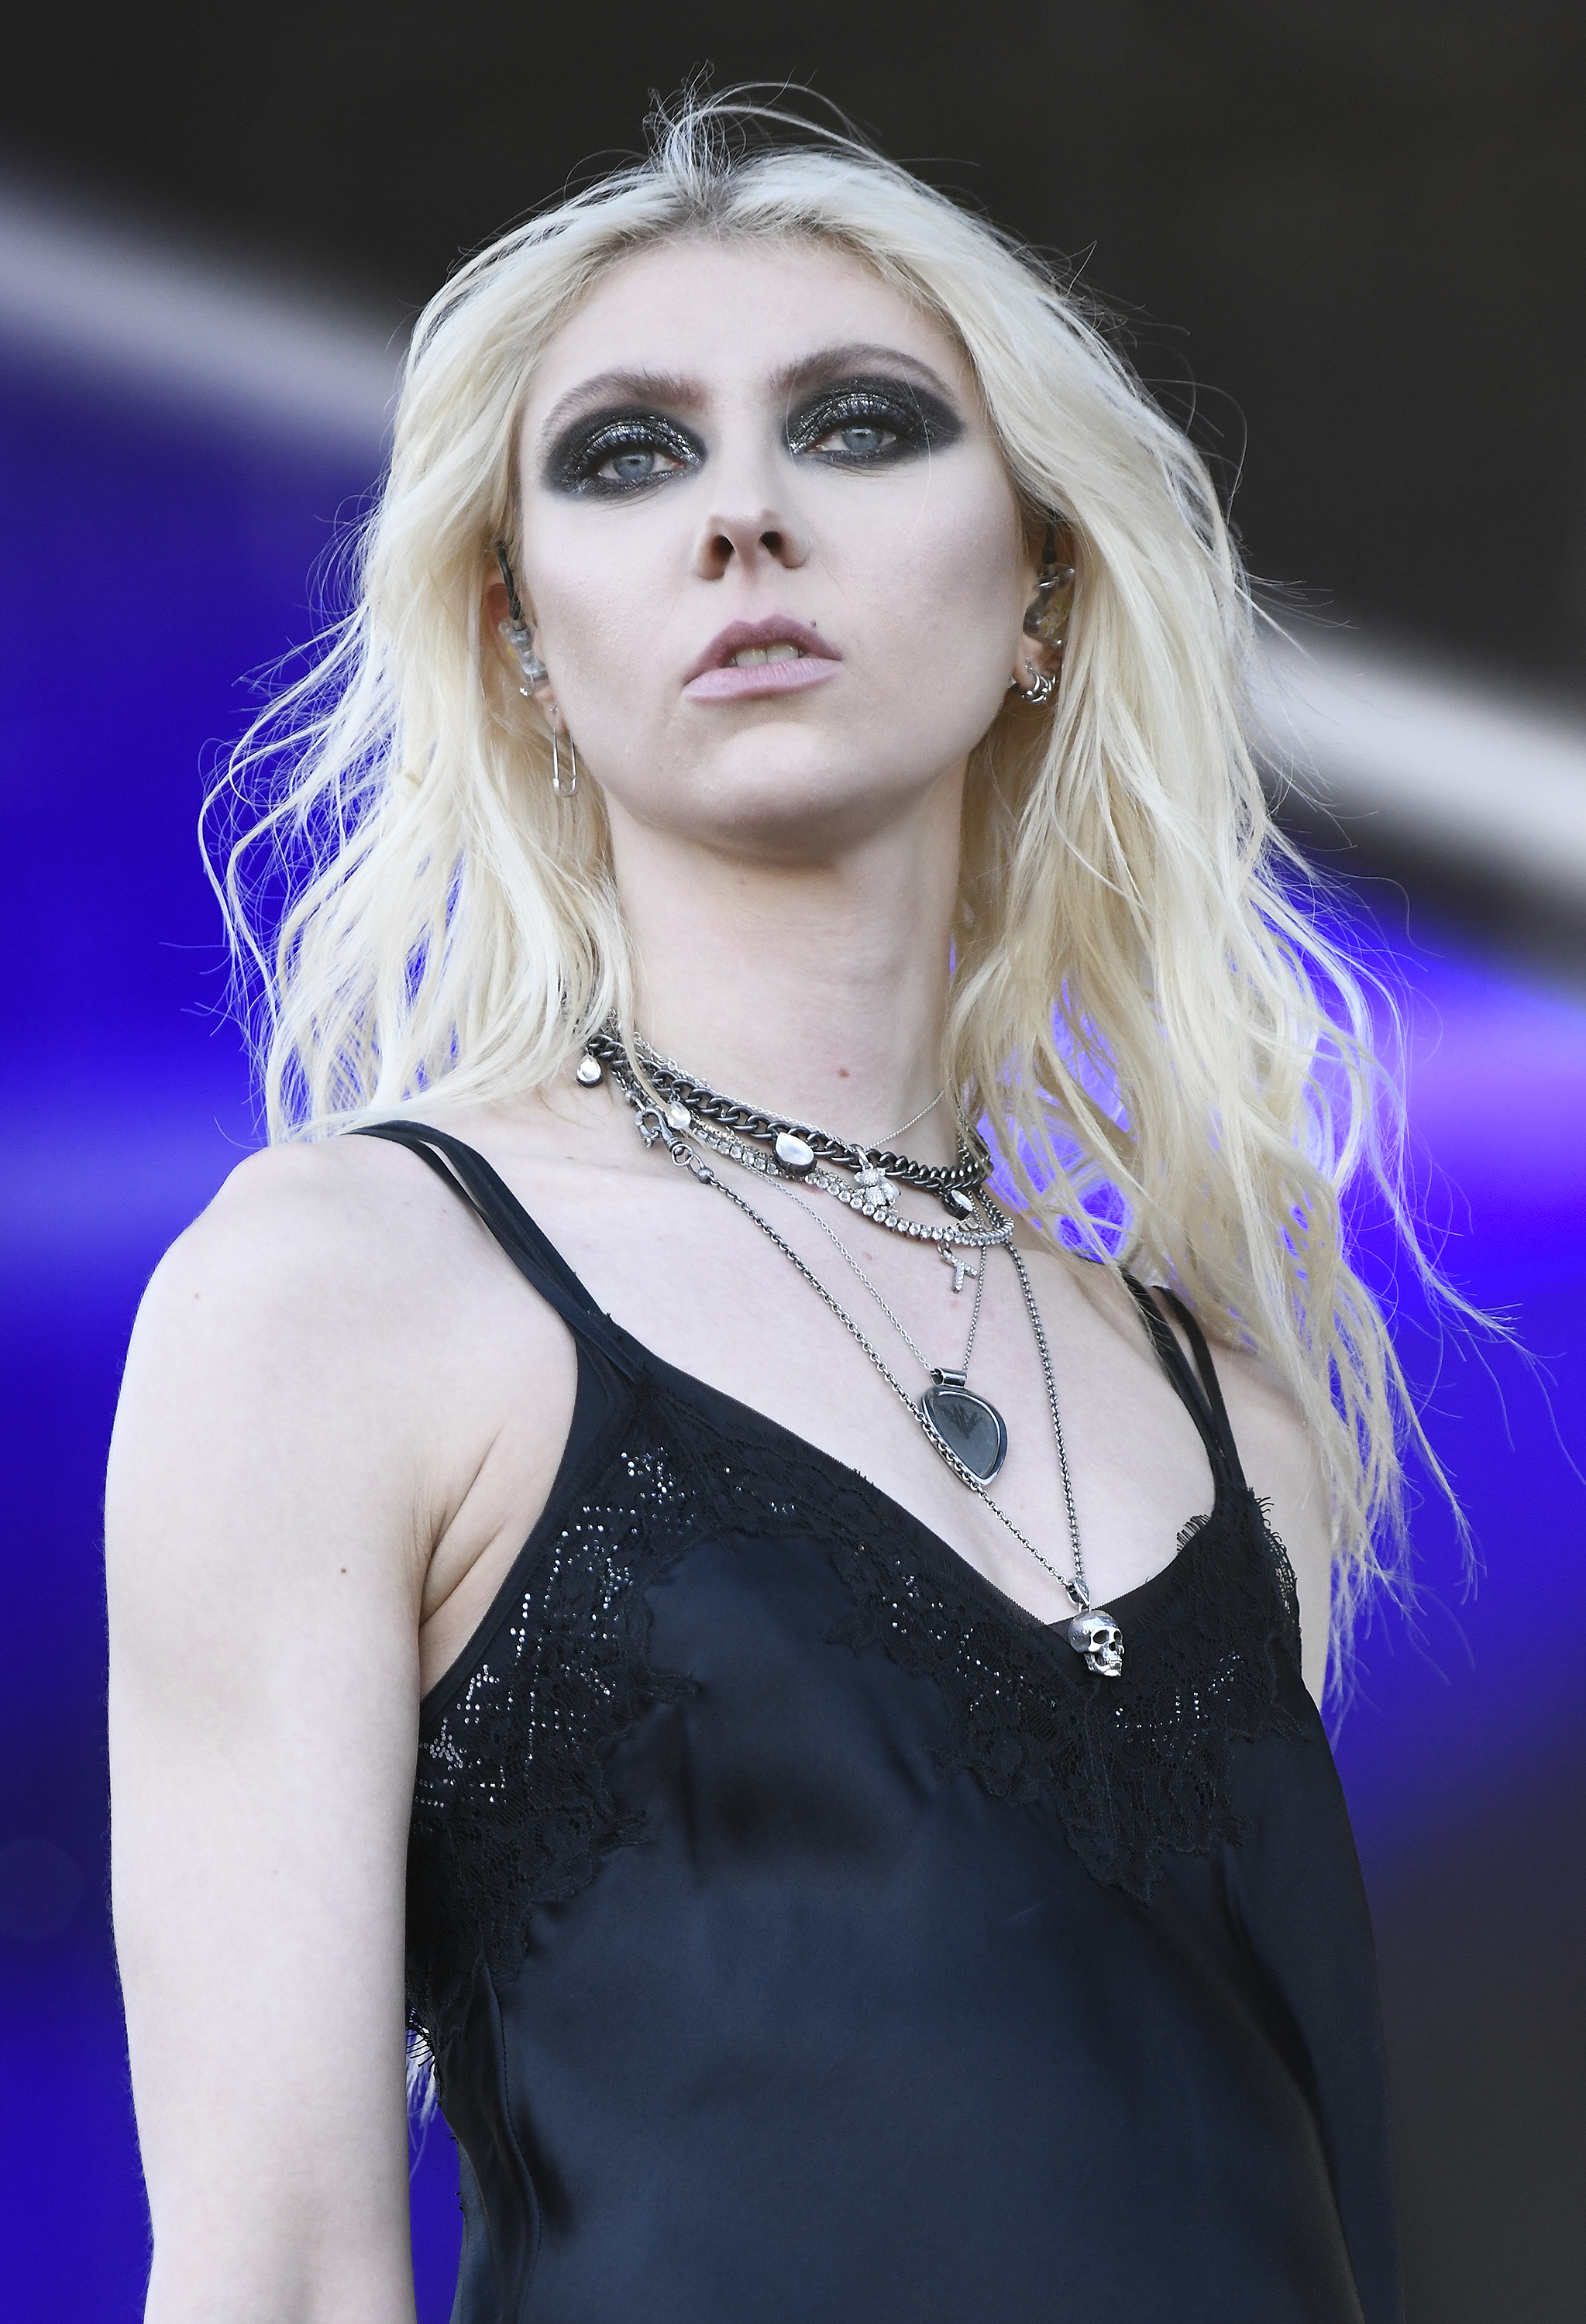 closeup of her with dark eye makeup and jewelry on stage